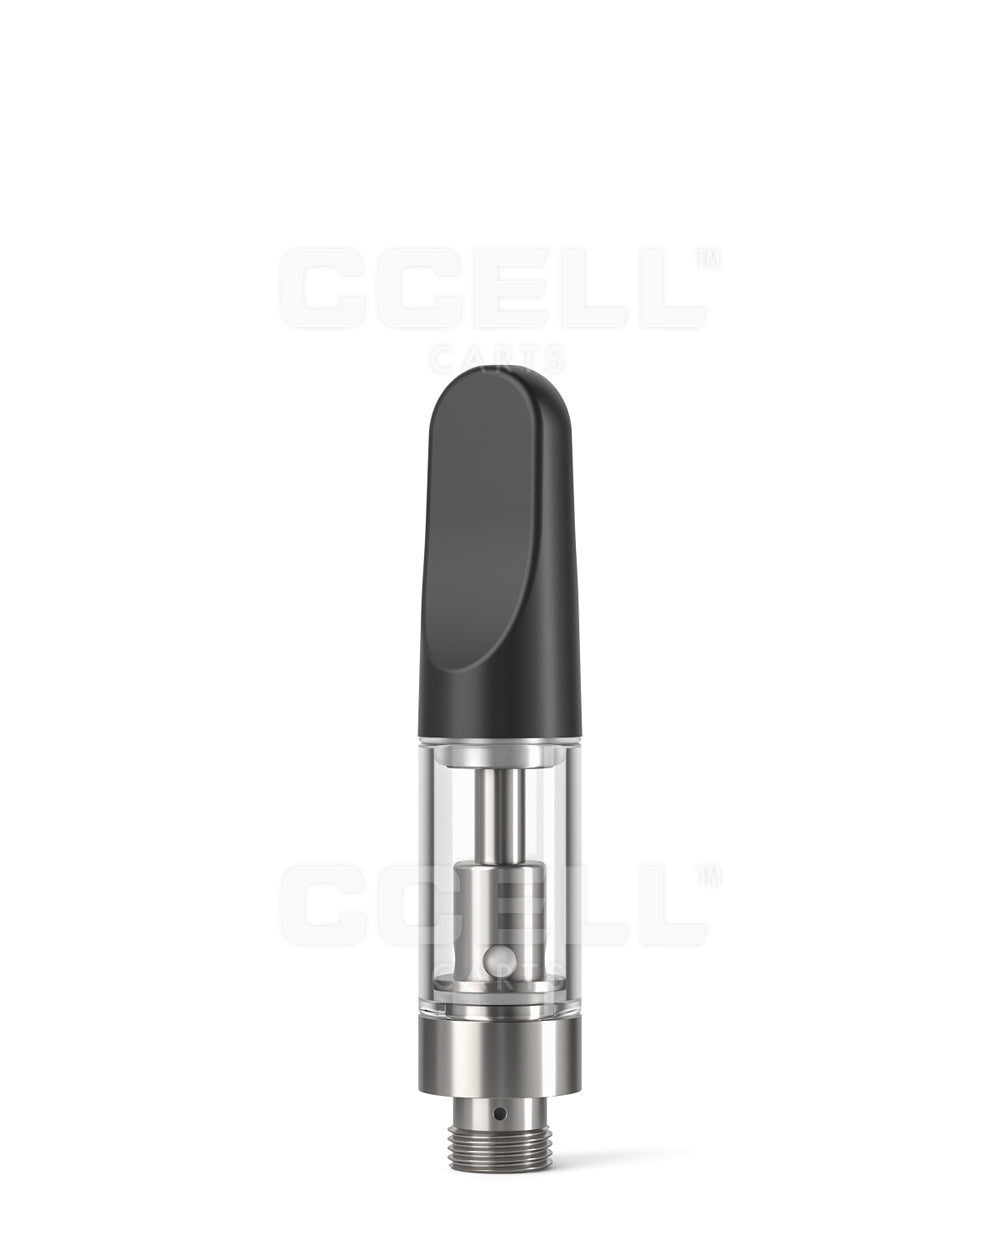 CCELL Glass Cartridge - Plastic Tapered Mouthpiece 0.5ml - 100 Count